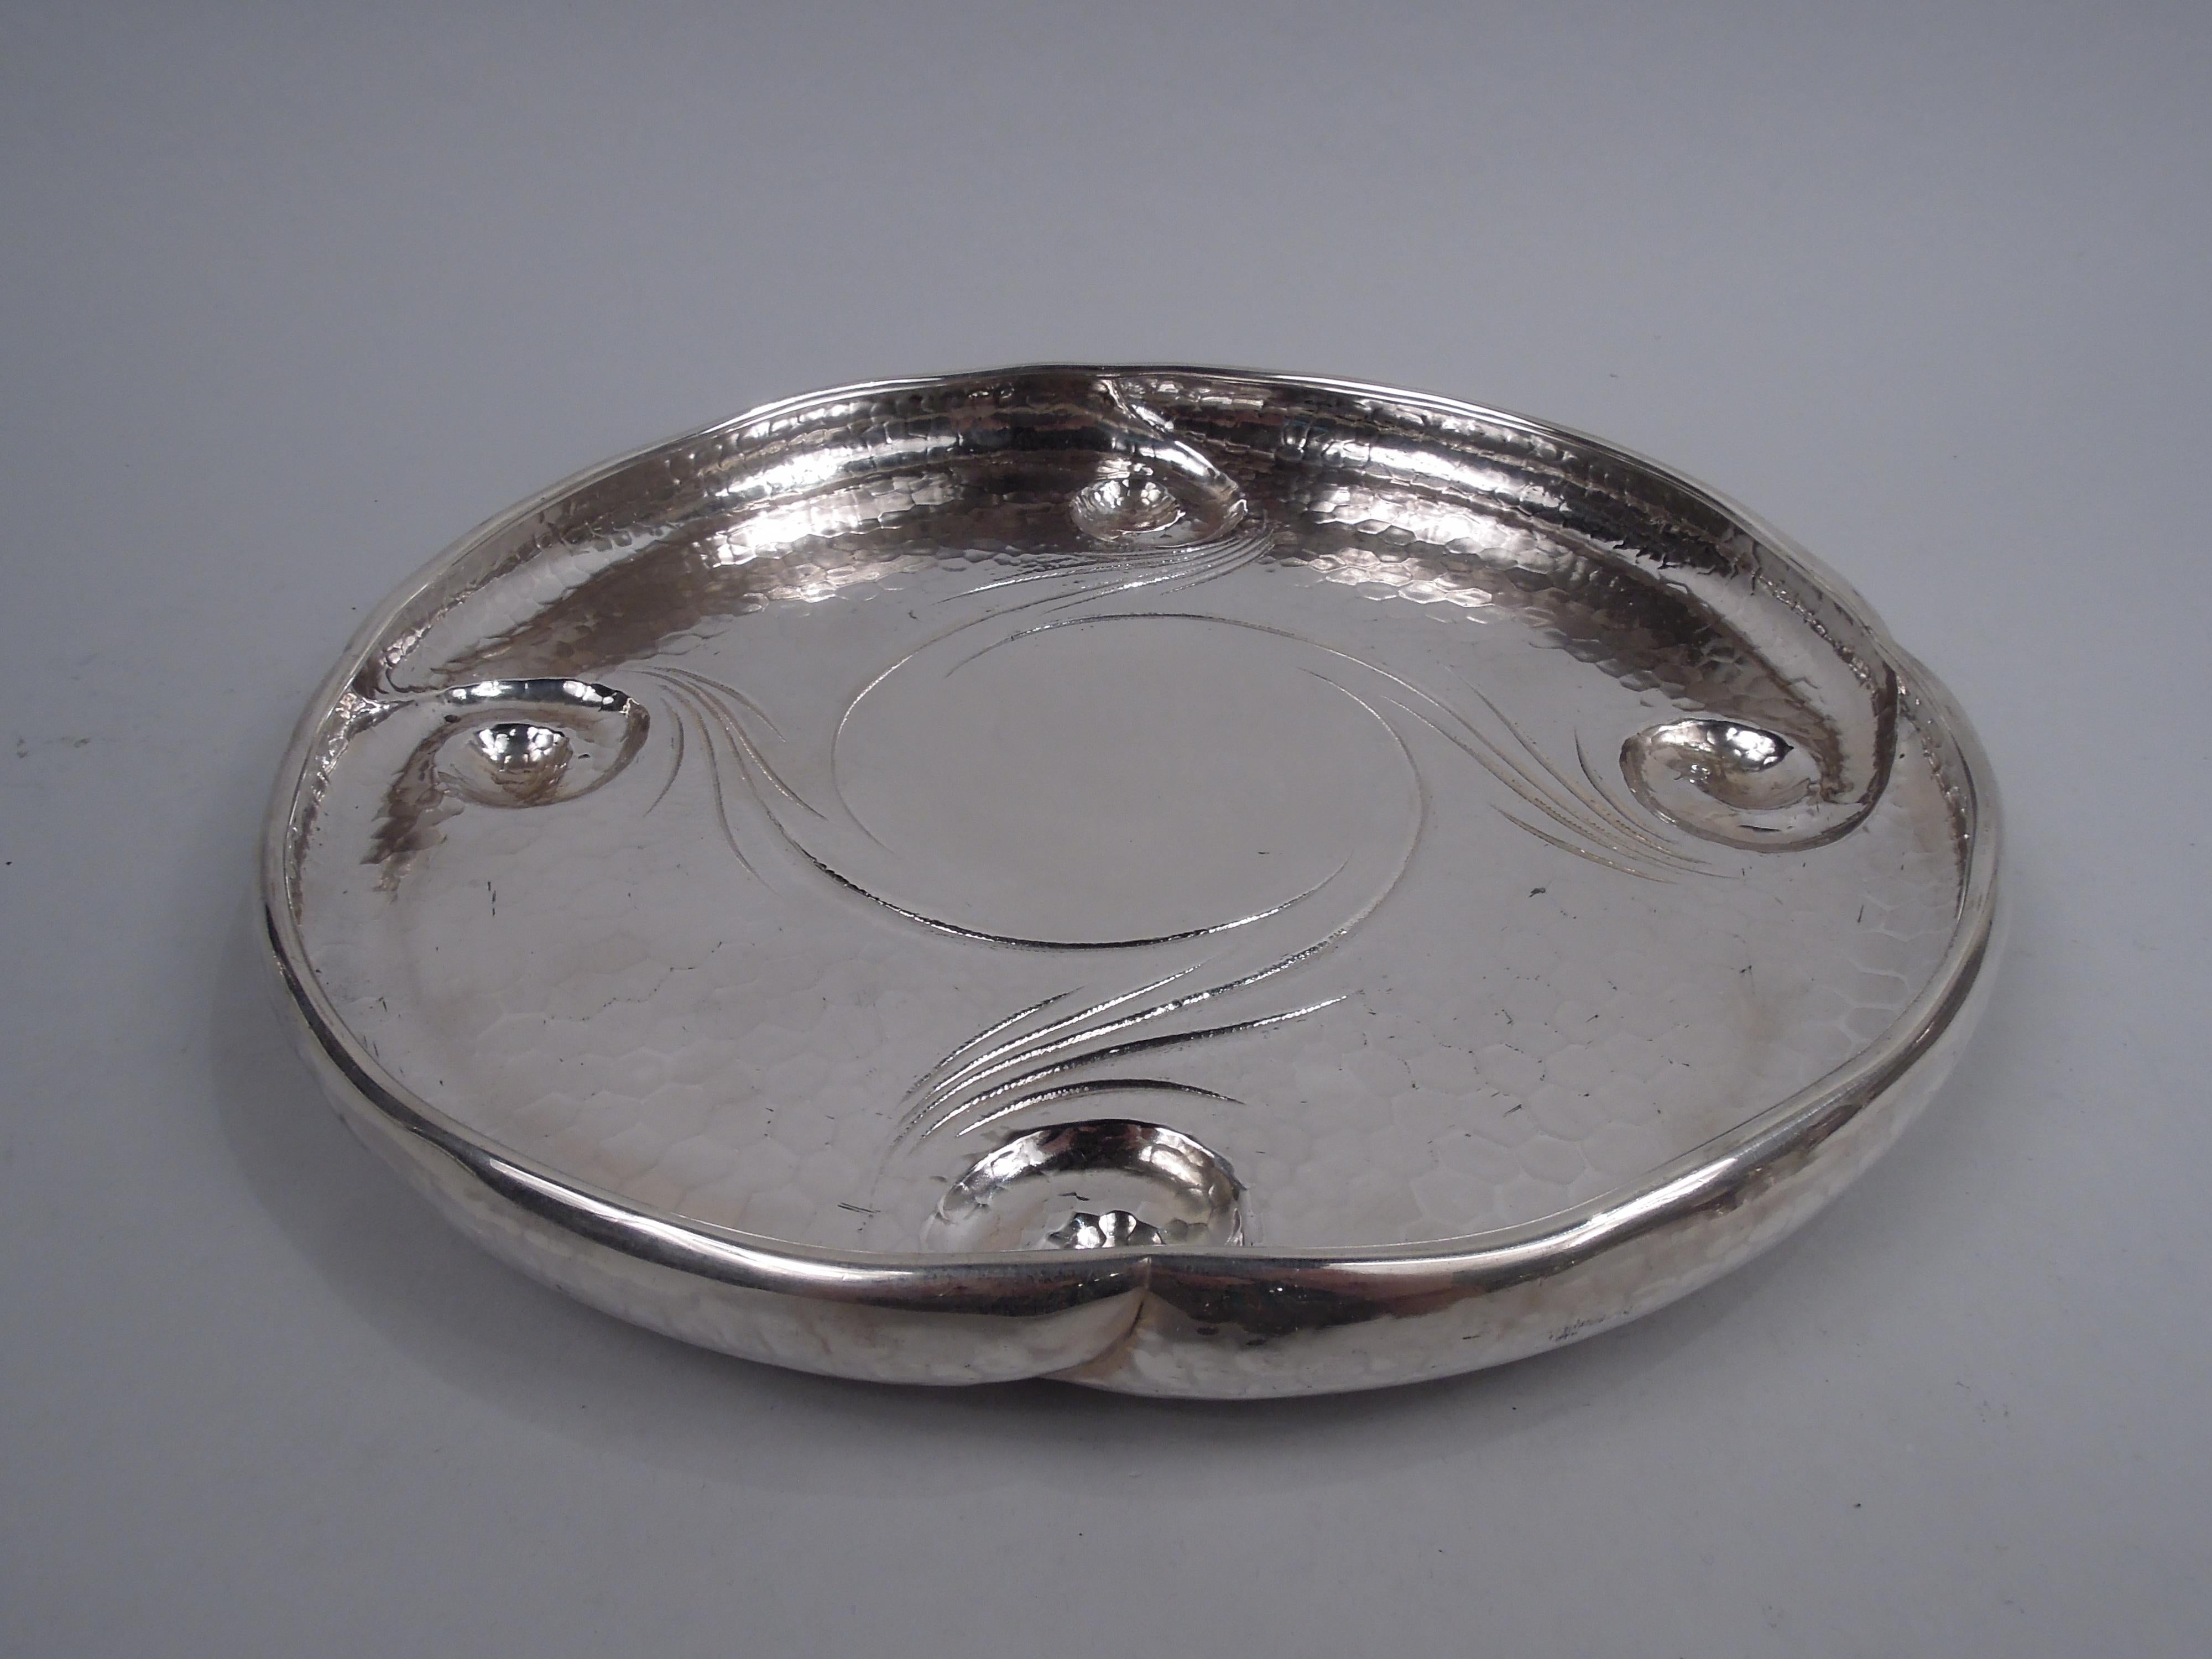 Aesthetic Japonesque sterling silver lily pad tray. Made by Tiffany & Co. in New York, ca 1881. Round with curved and lobed sides. Four “welled” volute scrolls forming supports with stippled tendrils encircling plain center (vacant). Allover spot